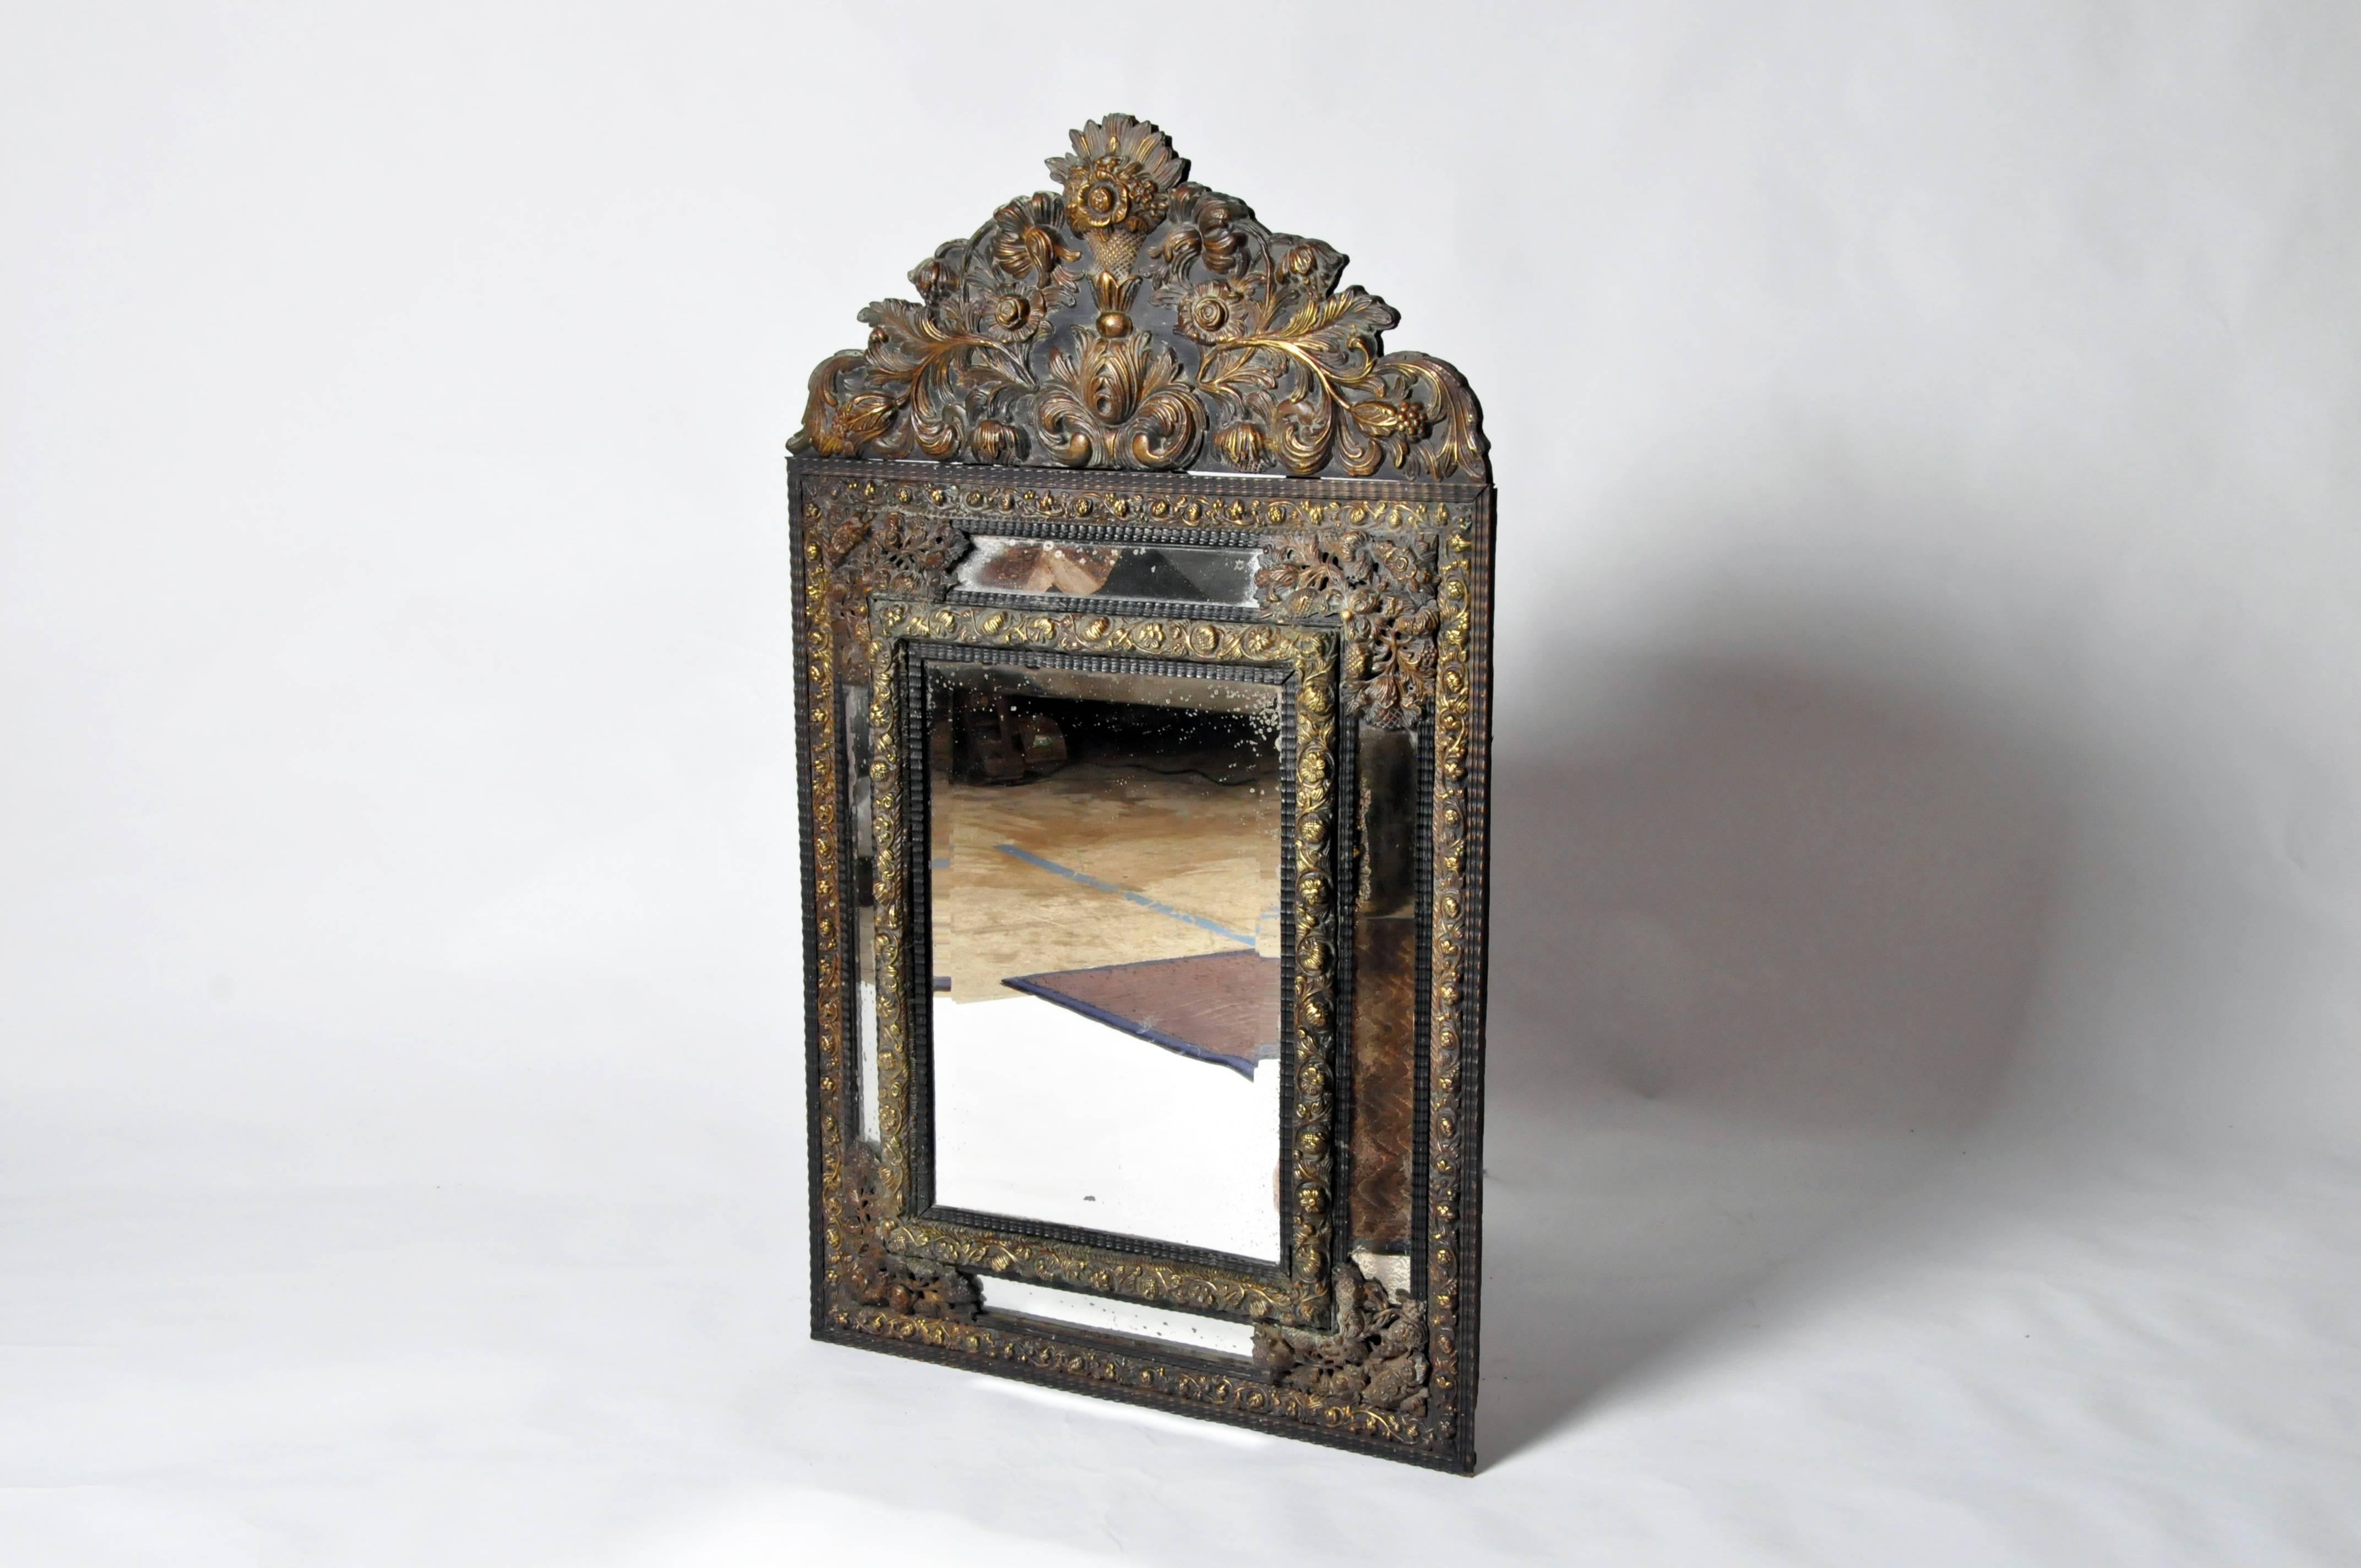 Brass frame with arched top and repousse decoration, rectangular beveled mirror plate. Exceptionally fine brass repousse supplemented with another metal, possibly copper. The quality of decoration makes earlier than 19th century date plausible.